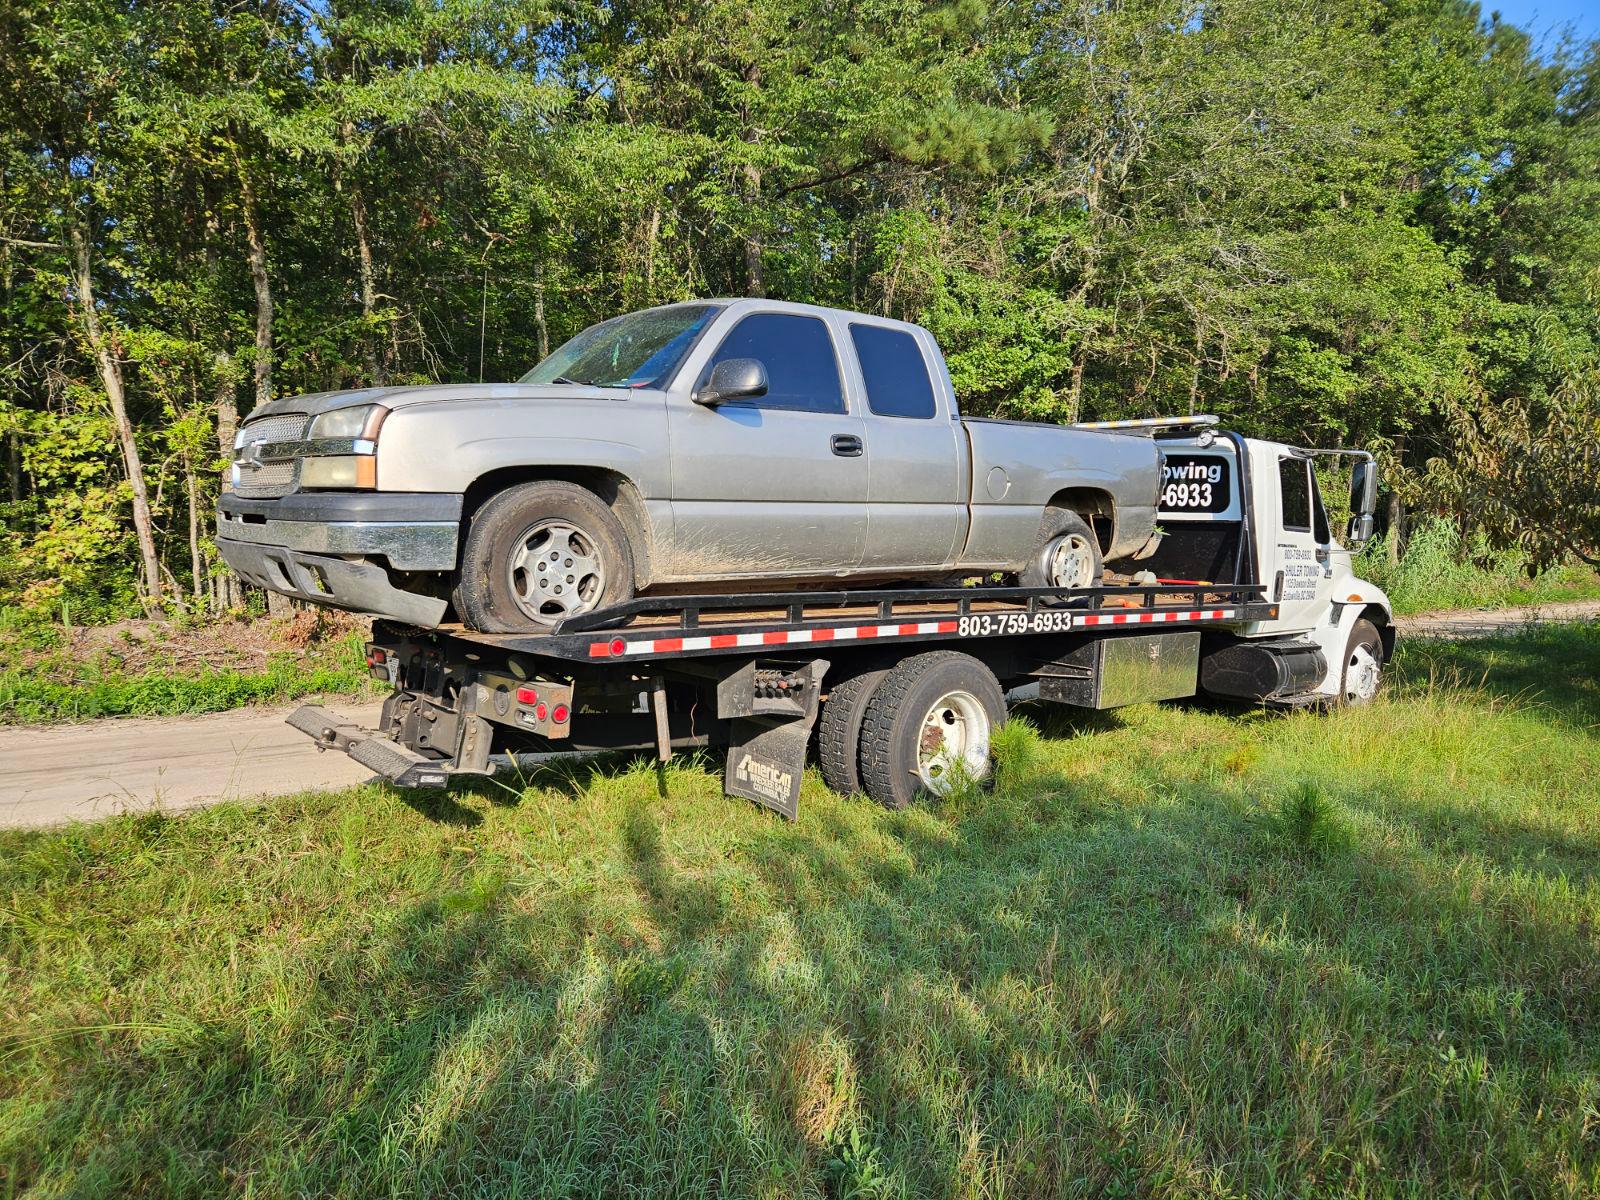 Shuler Towing, LLC offers dependable car towing services for all types of vehicles. Whether you're dealing with a breakdown, accident, or any other towing need, our team is ready to provide efficient and safe car towing solutions.